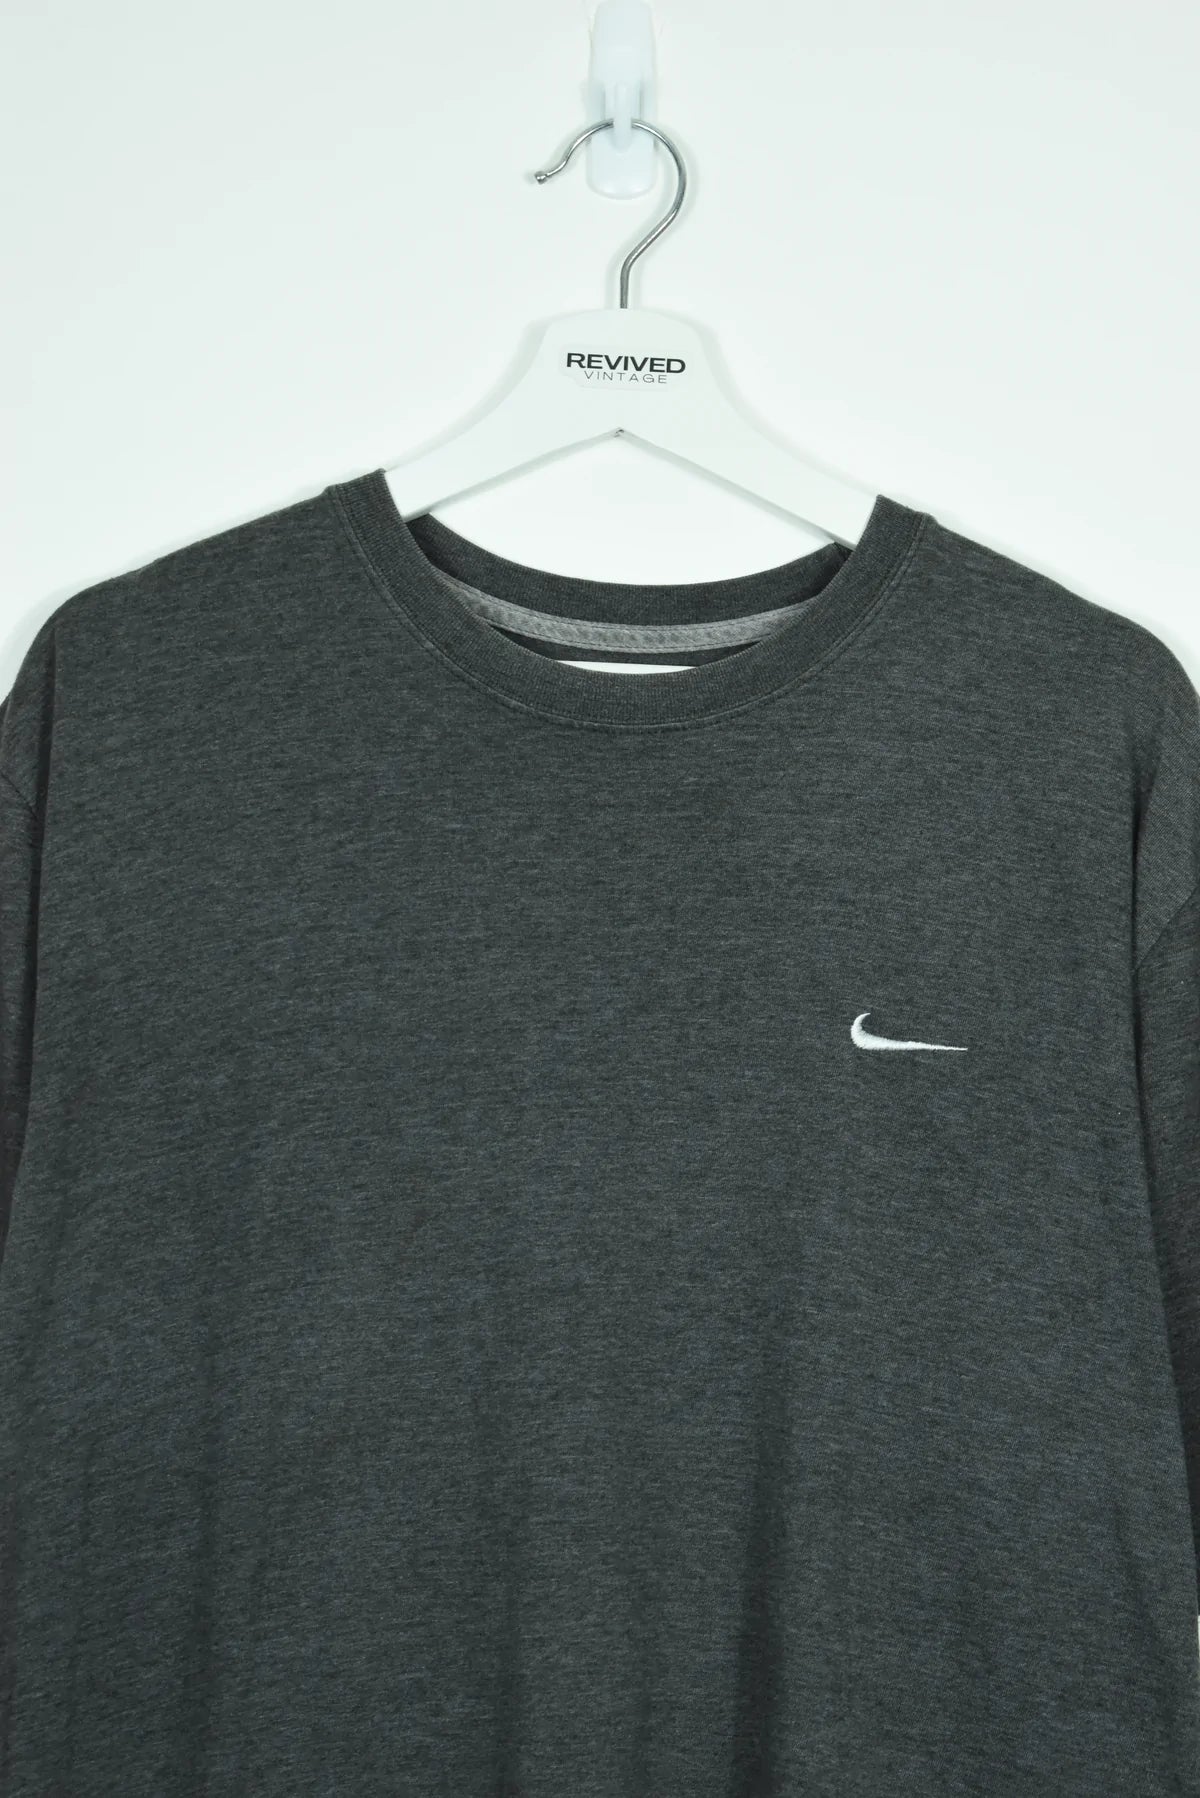 VINTAGE NIKE EMBROIDERY SMALL SWOOSH T SHIRT XLARGE